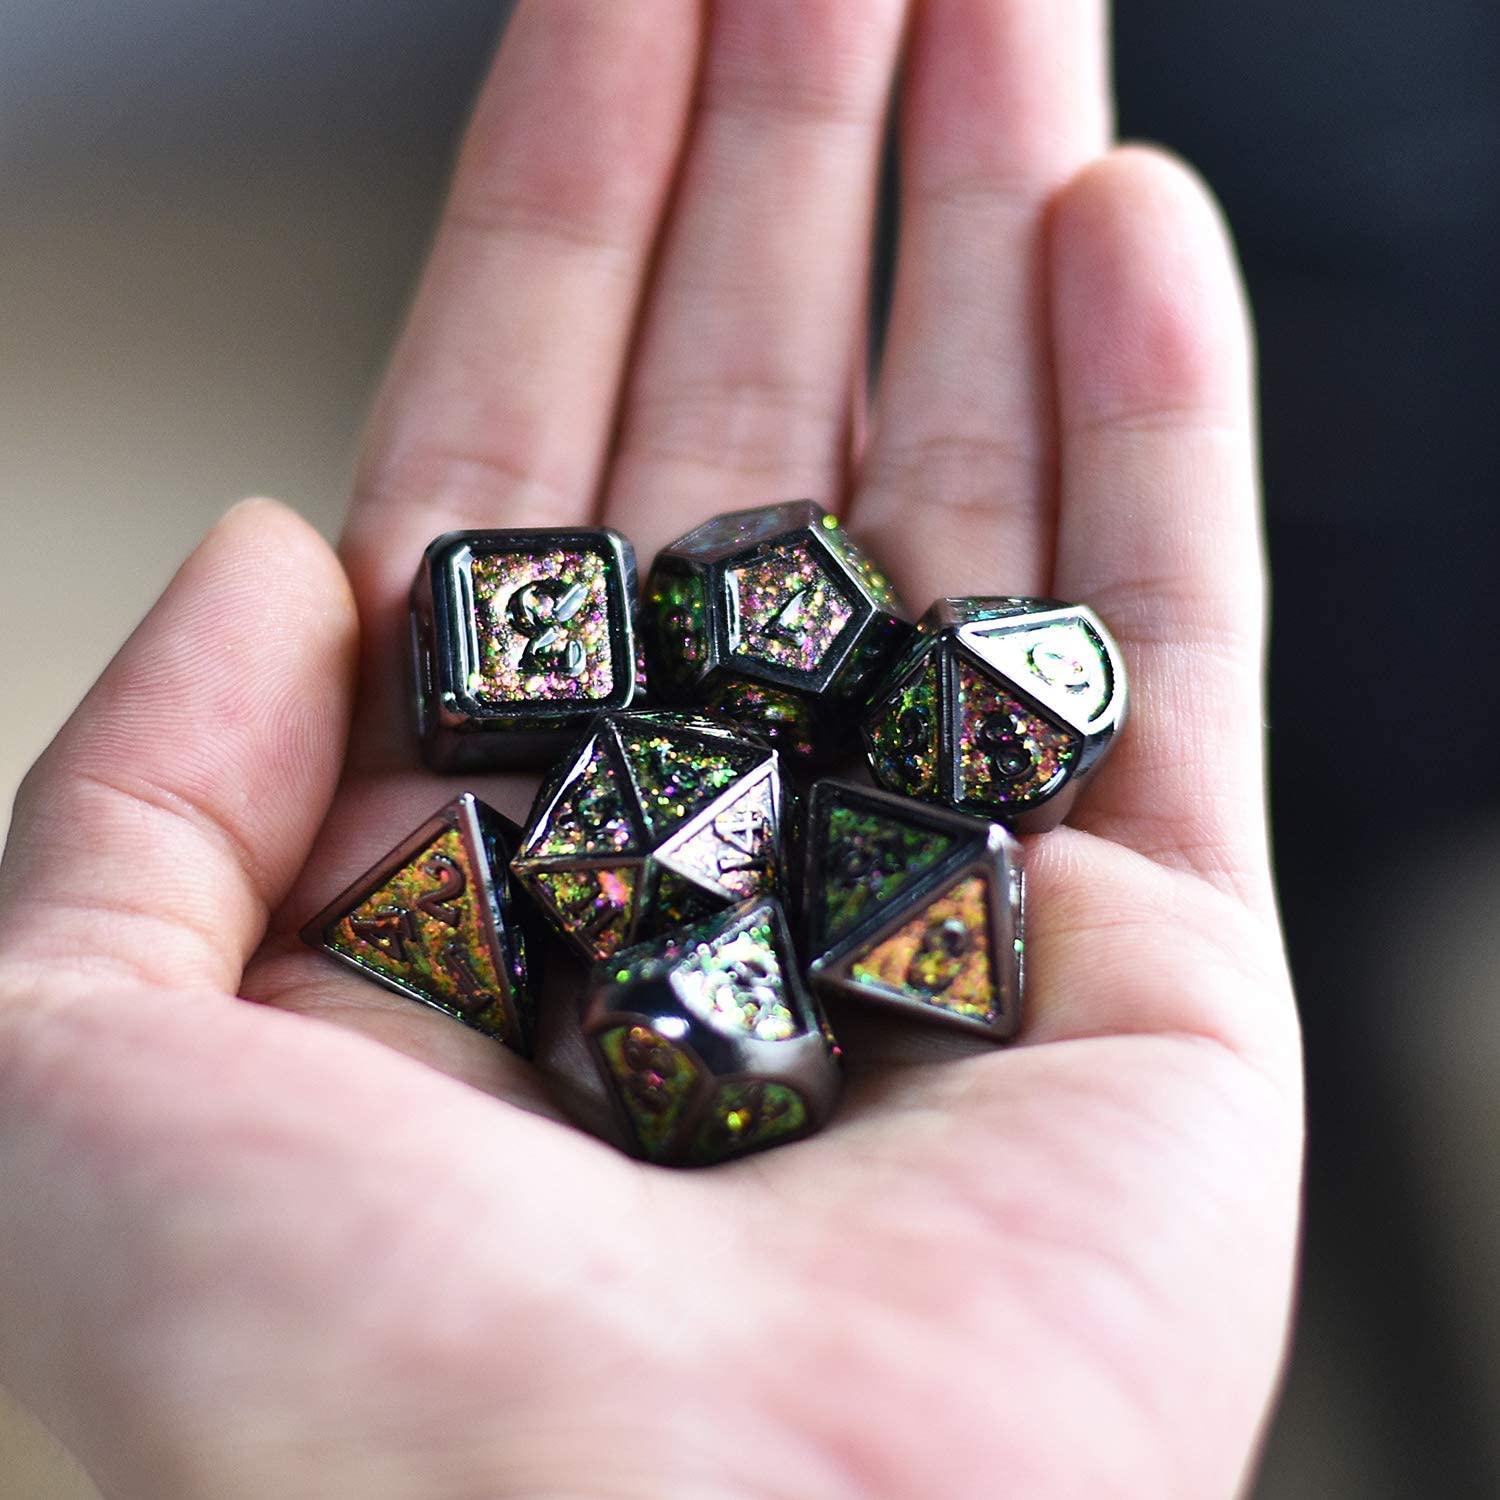 Viridian Shimmer 7 piece dice set sitting in hand